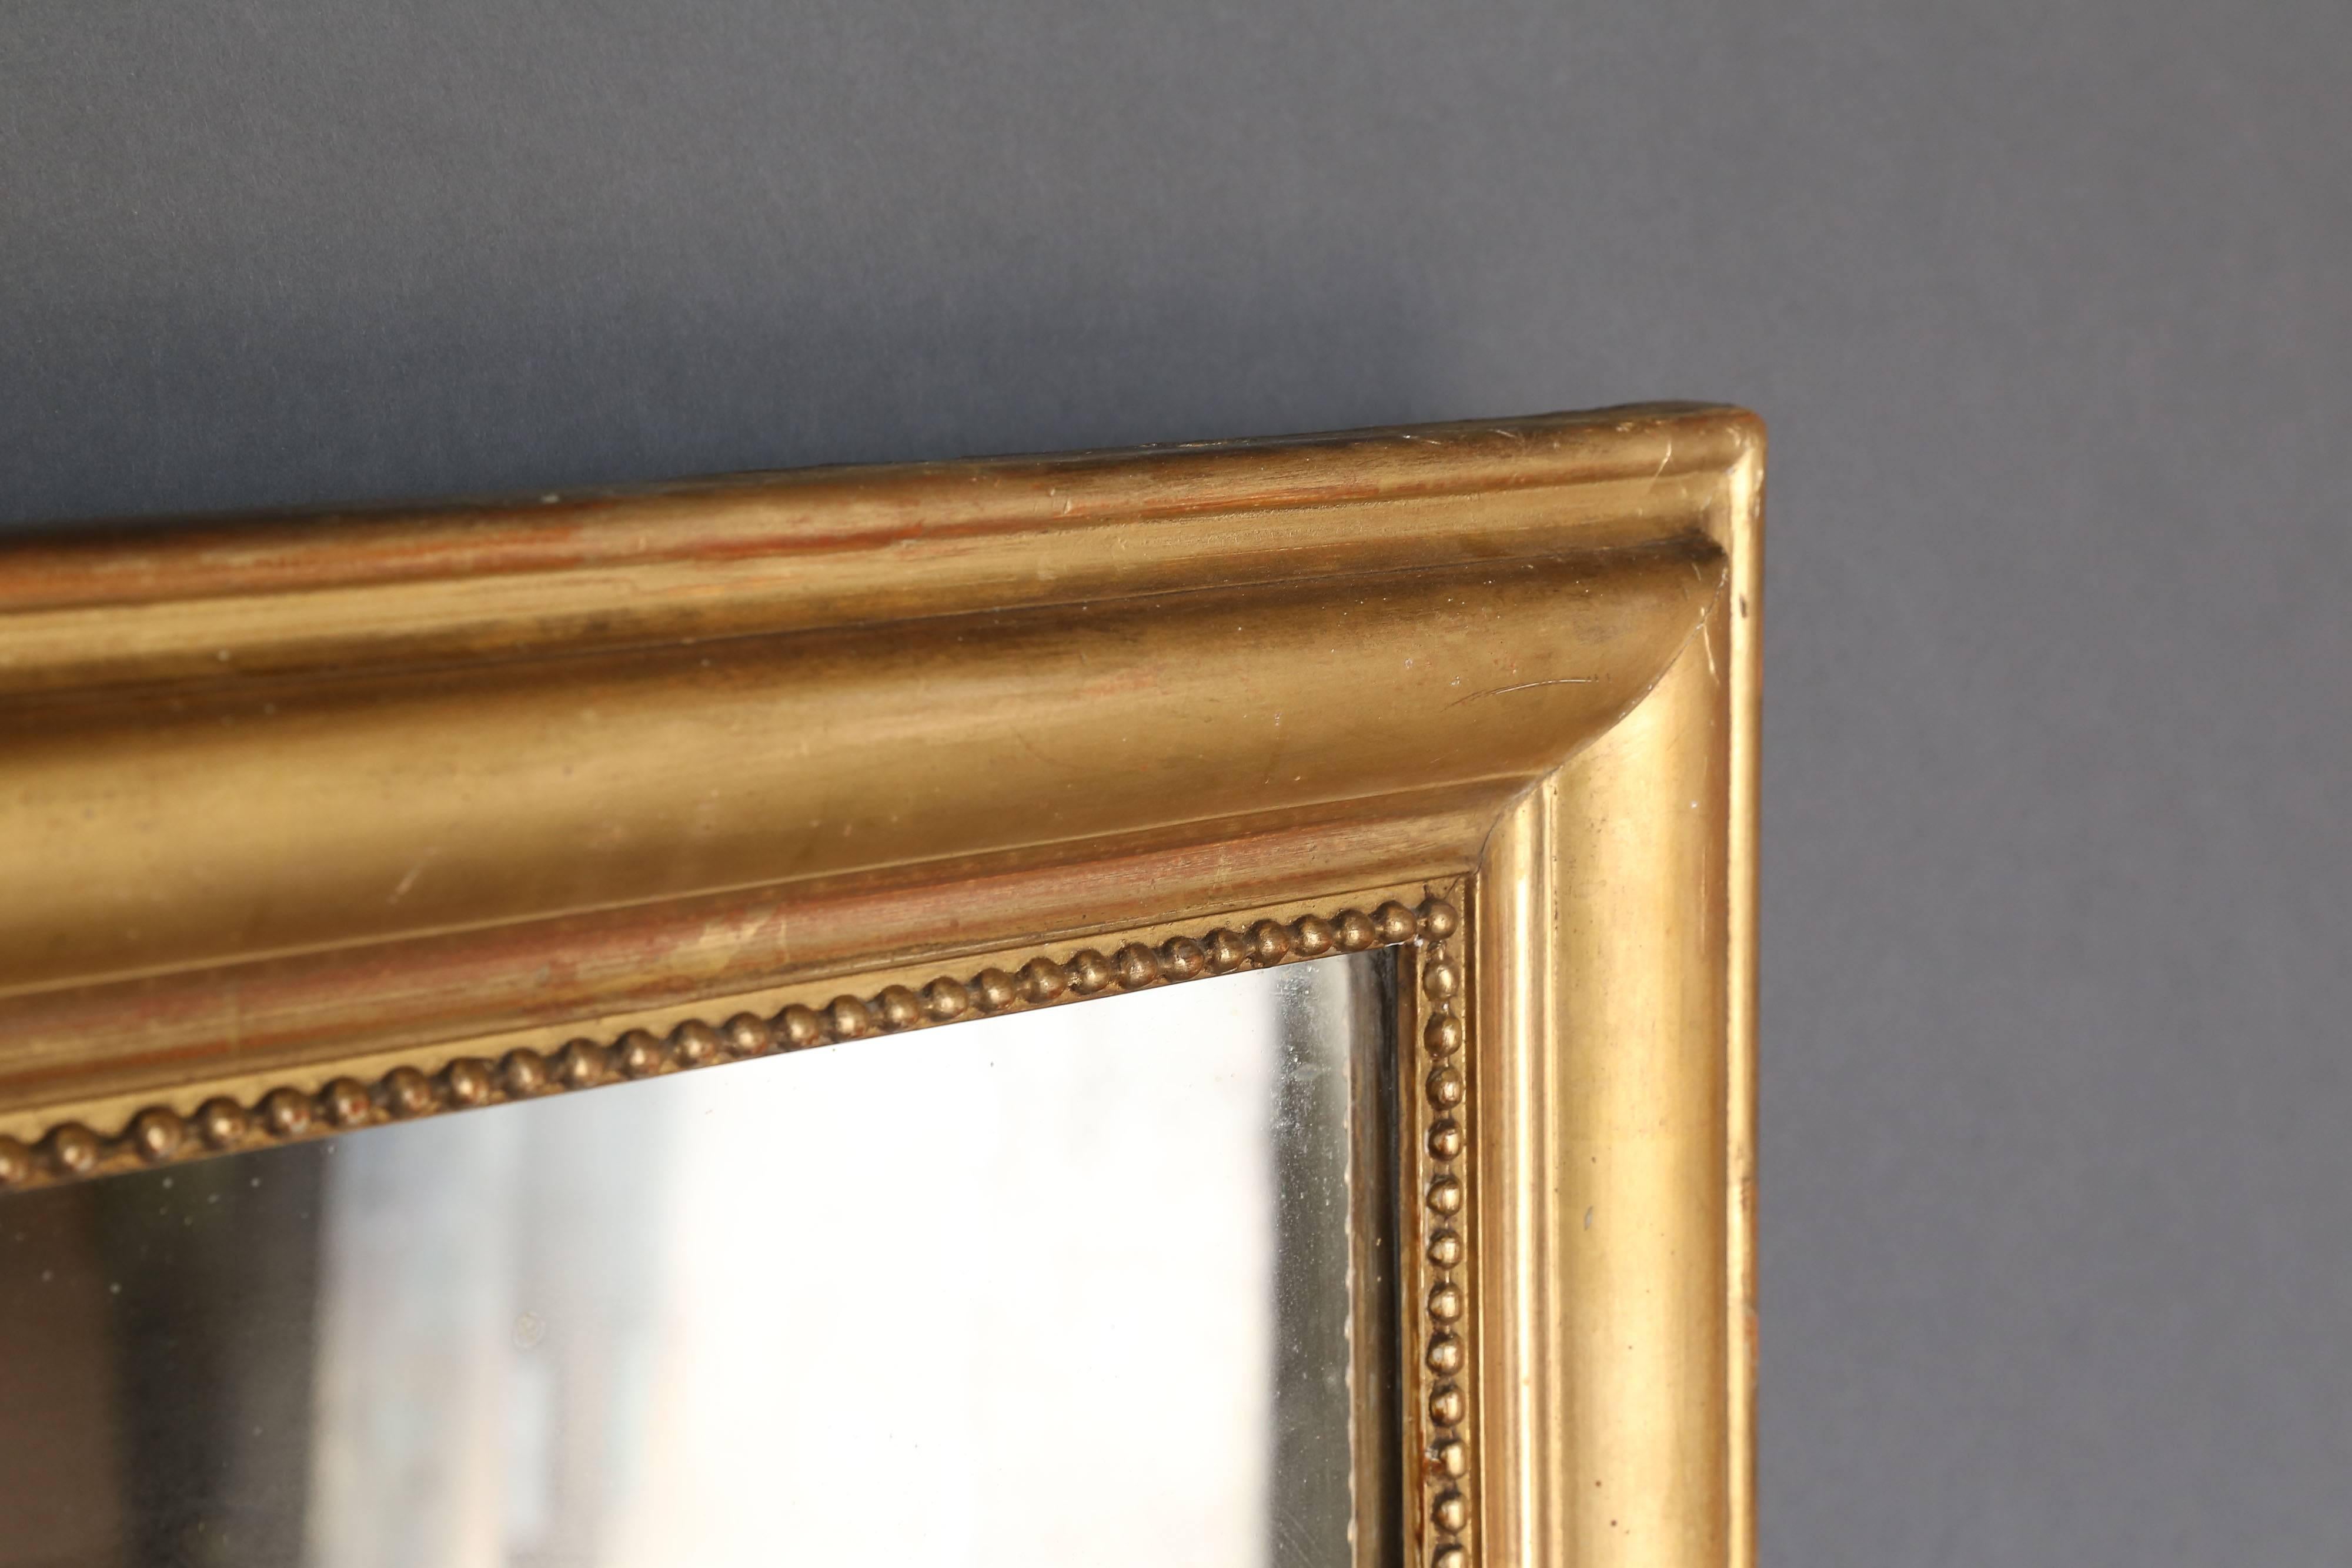 19th century French gilt mirror with pearl shaped details on three sides of the interior perimeter. Simple design, circa 1890.